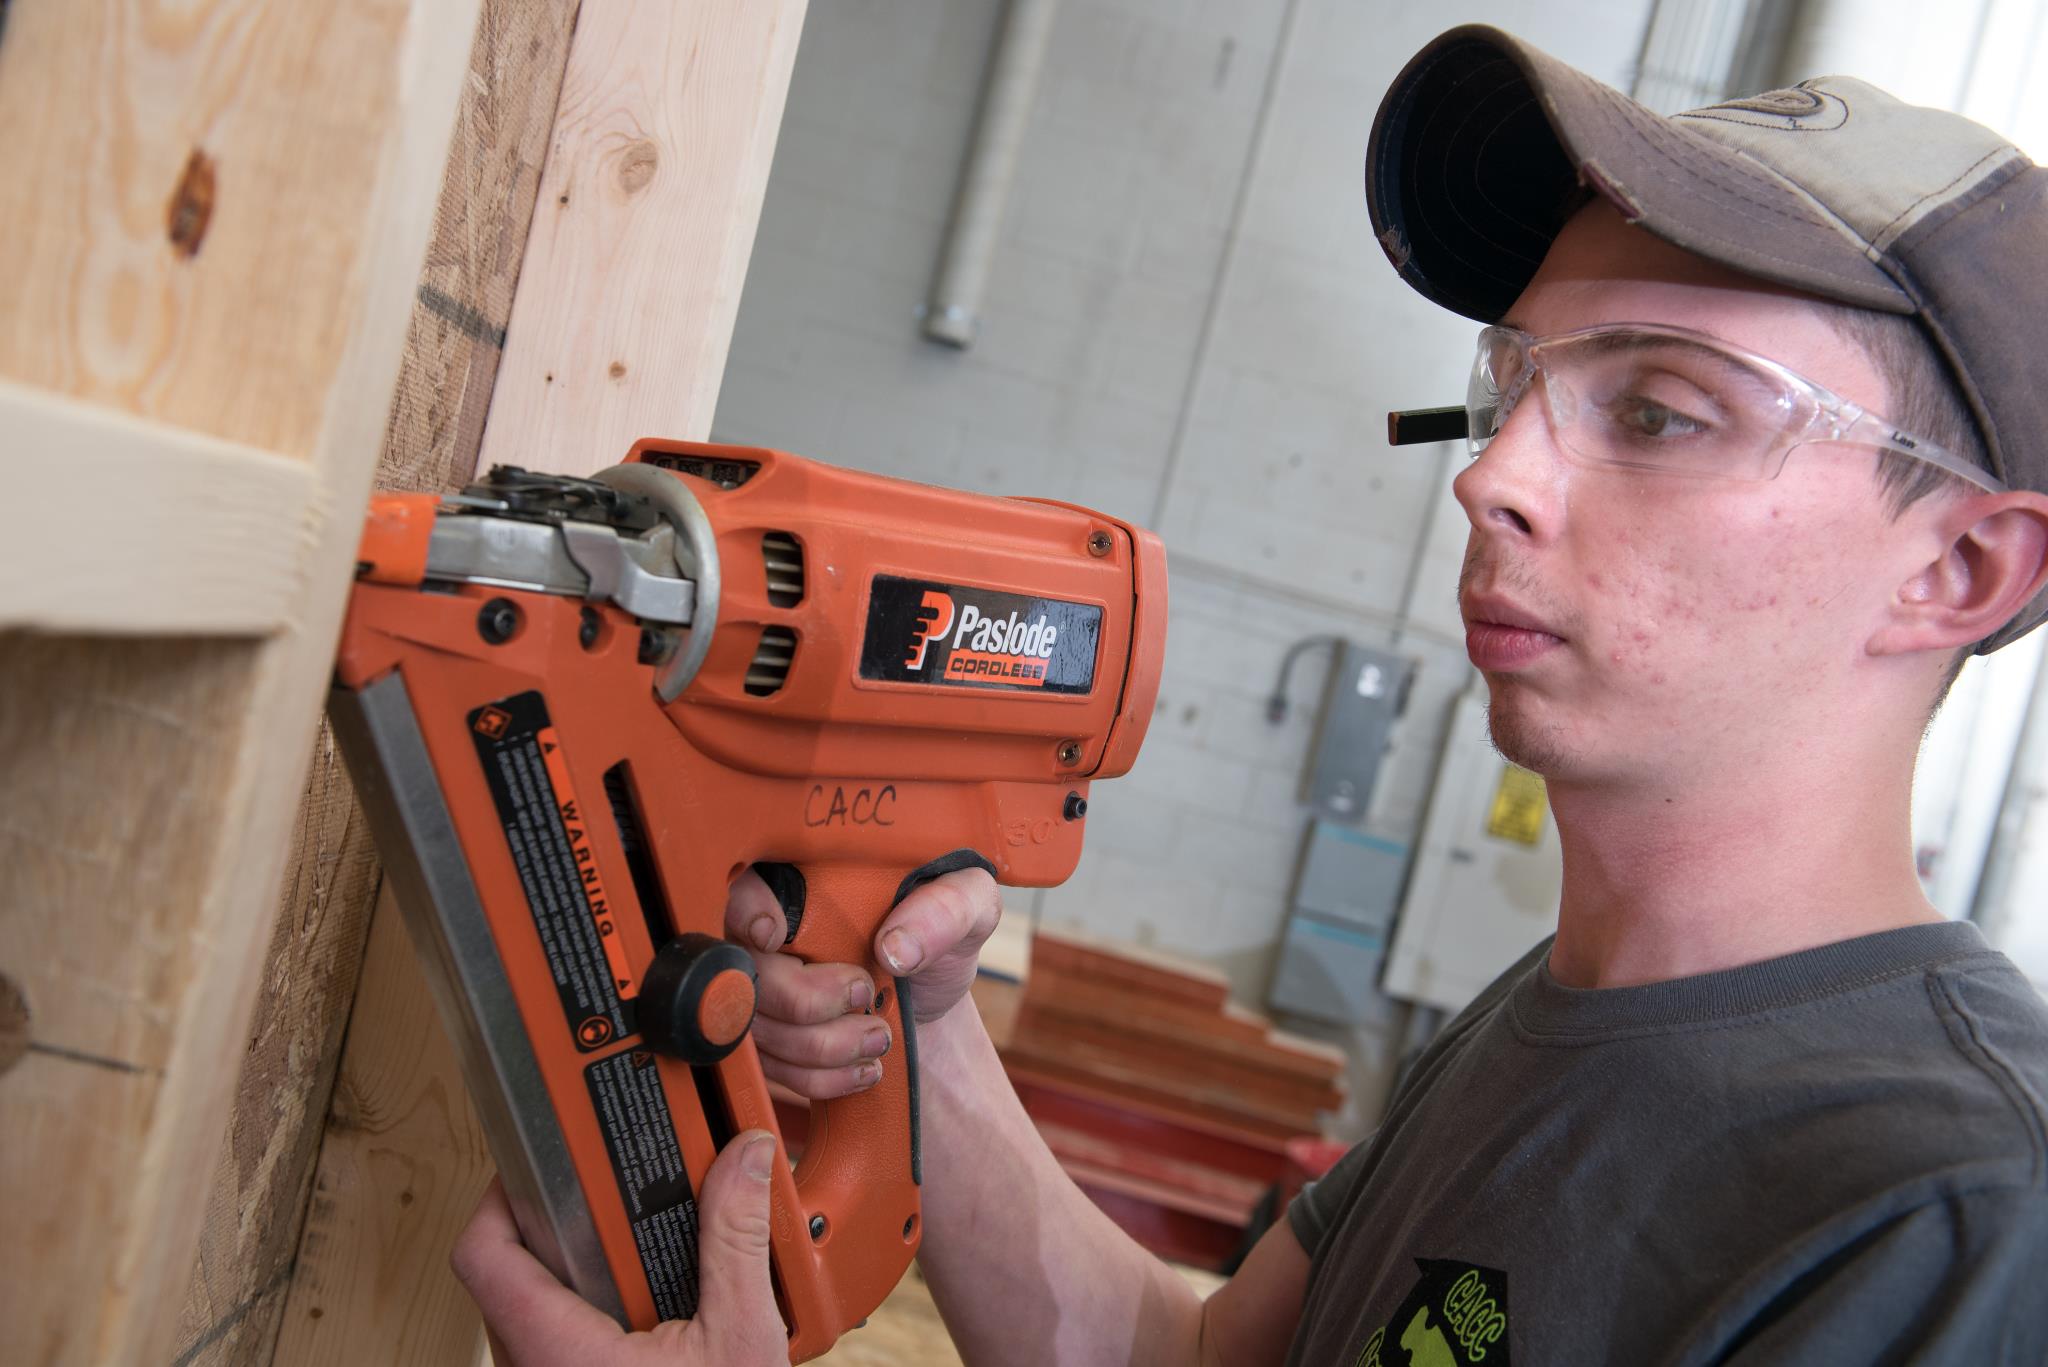 Male construction student uses a finish nailer on a piece of wood